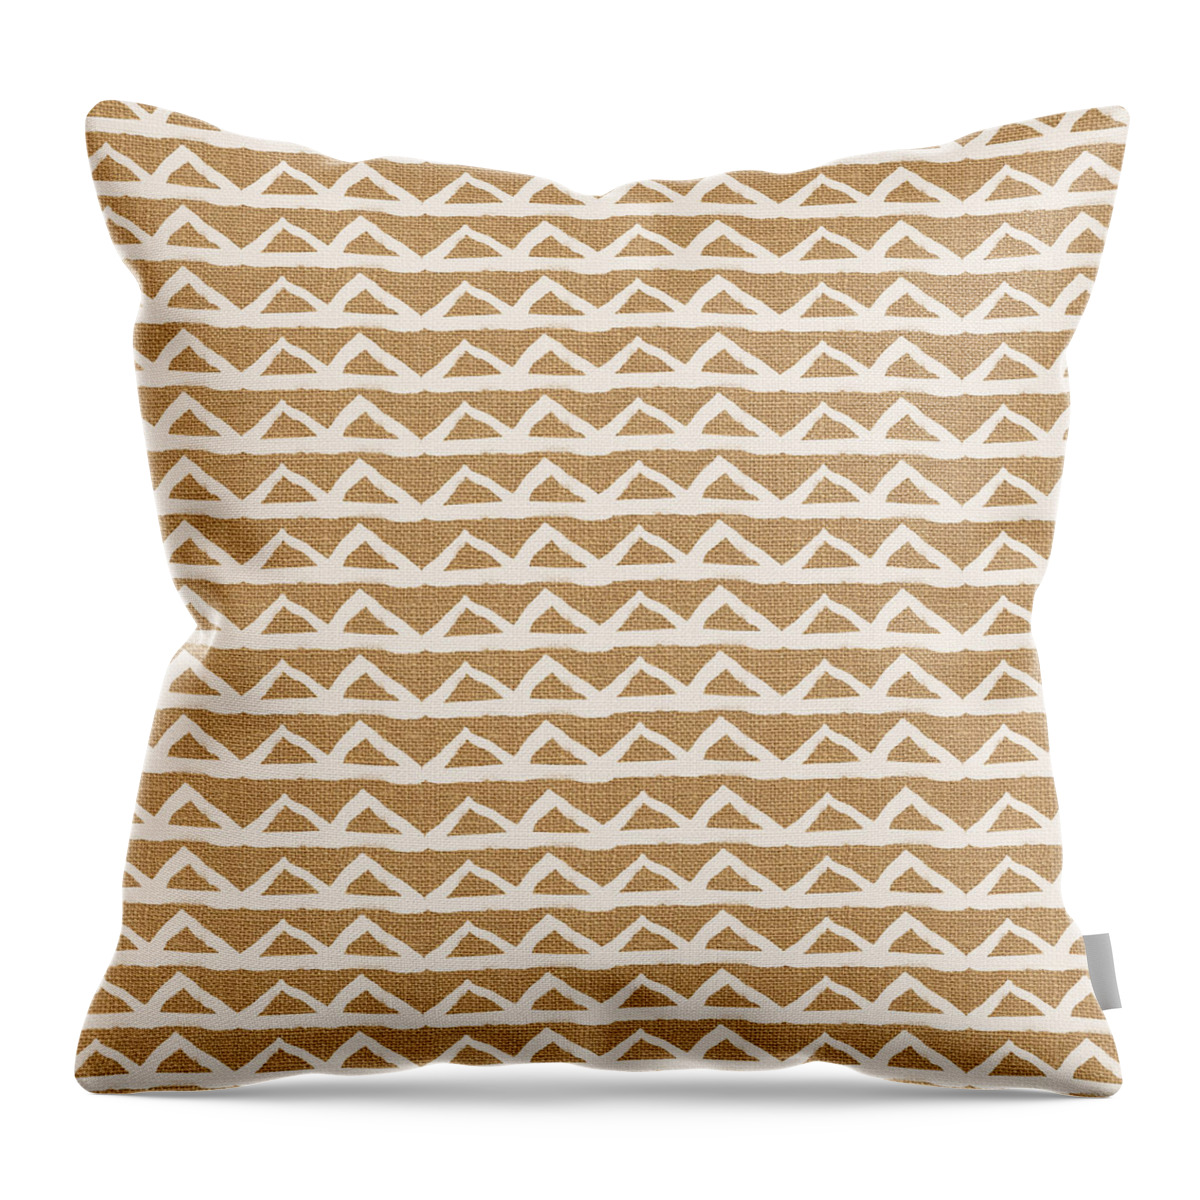 Triangles Throw Pillow featuring the mixed media White Triangles on Burlap by Linda Woods